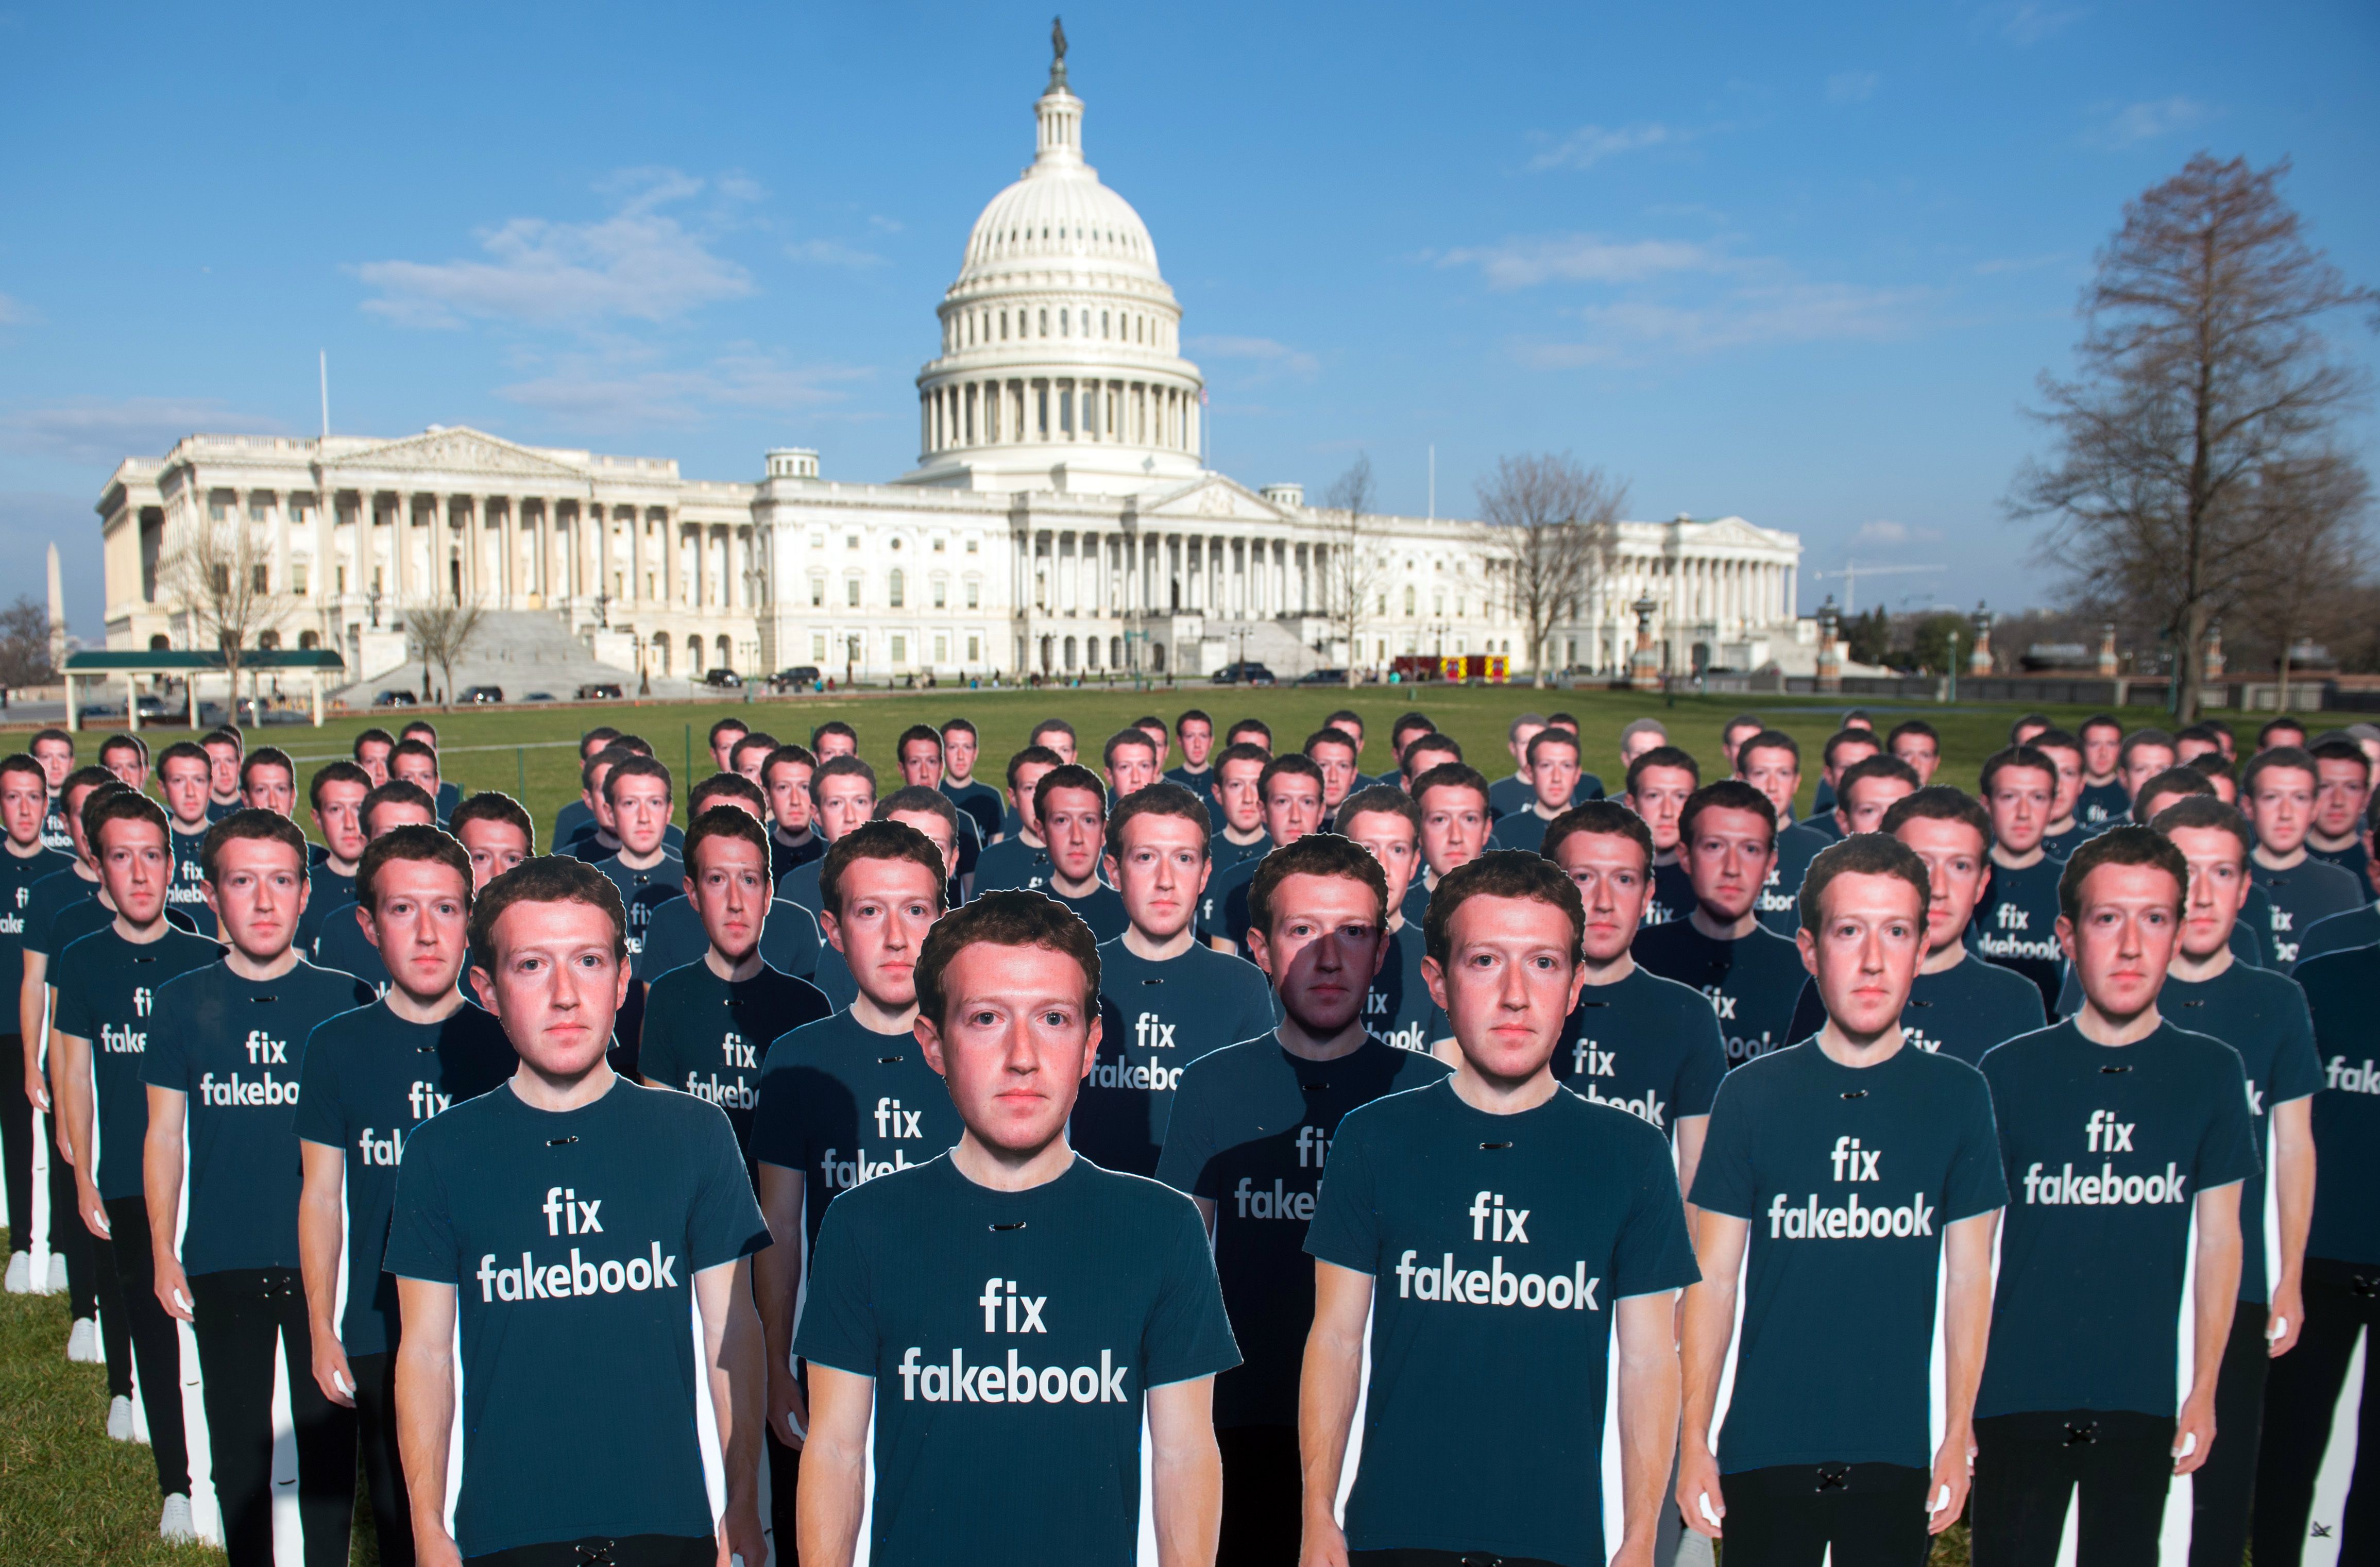 One hundred cardboard cutouts of Facebook founder and CEO Mark Zuckerberg stand outside the US Capitol in Washington, DC, April 10, 2018. - Advocacy group Avaaz is calling attention to what the groups says are hundreds of millions of fake accounts still spreading disinformation on Facebook.